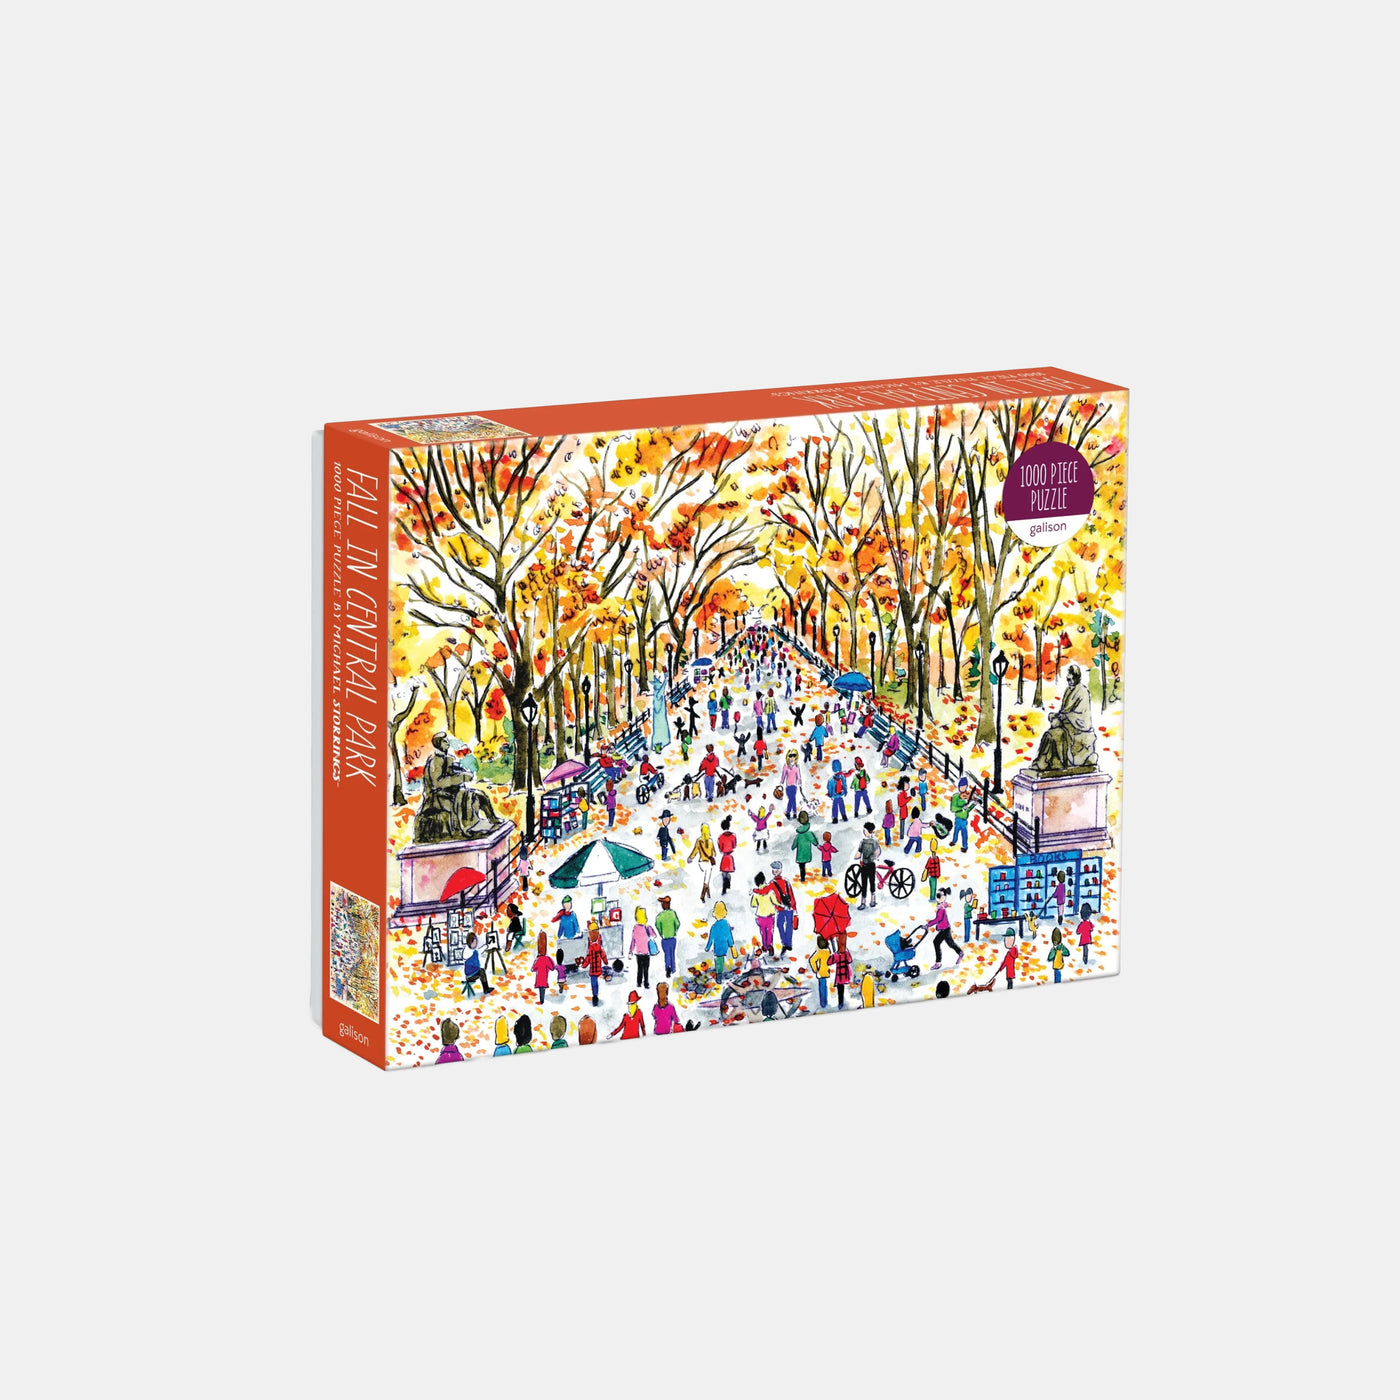 Michael Storrings Fall in Central Park 1000 Piece Puzzle